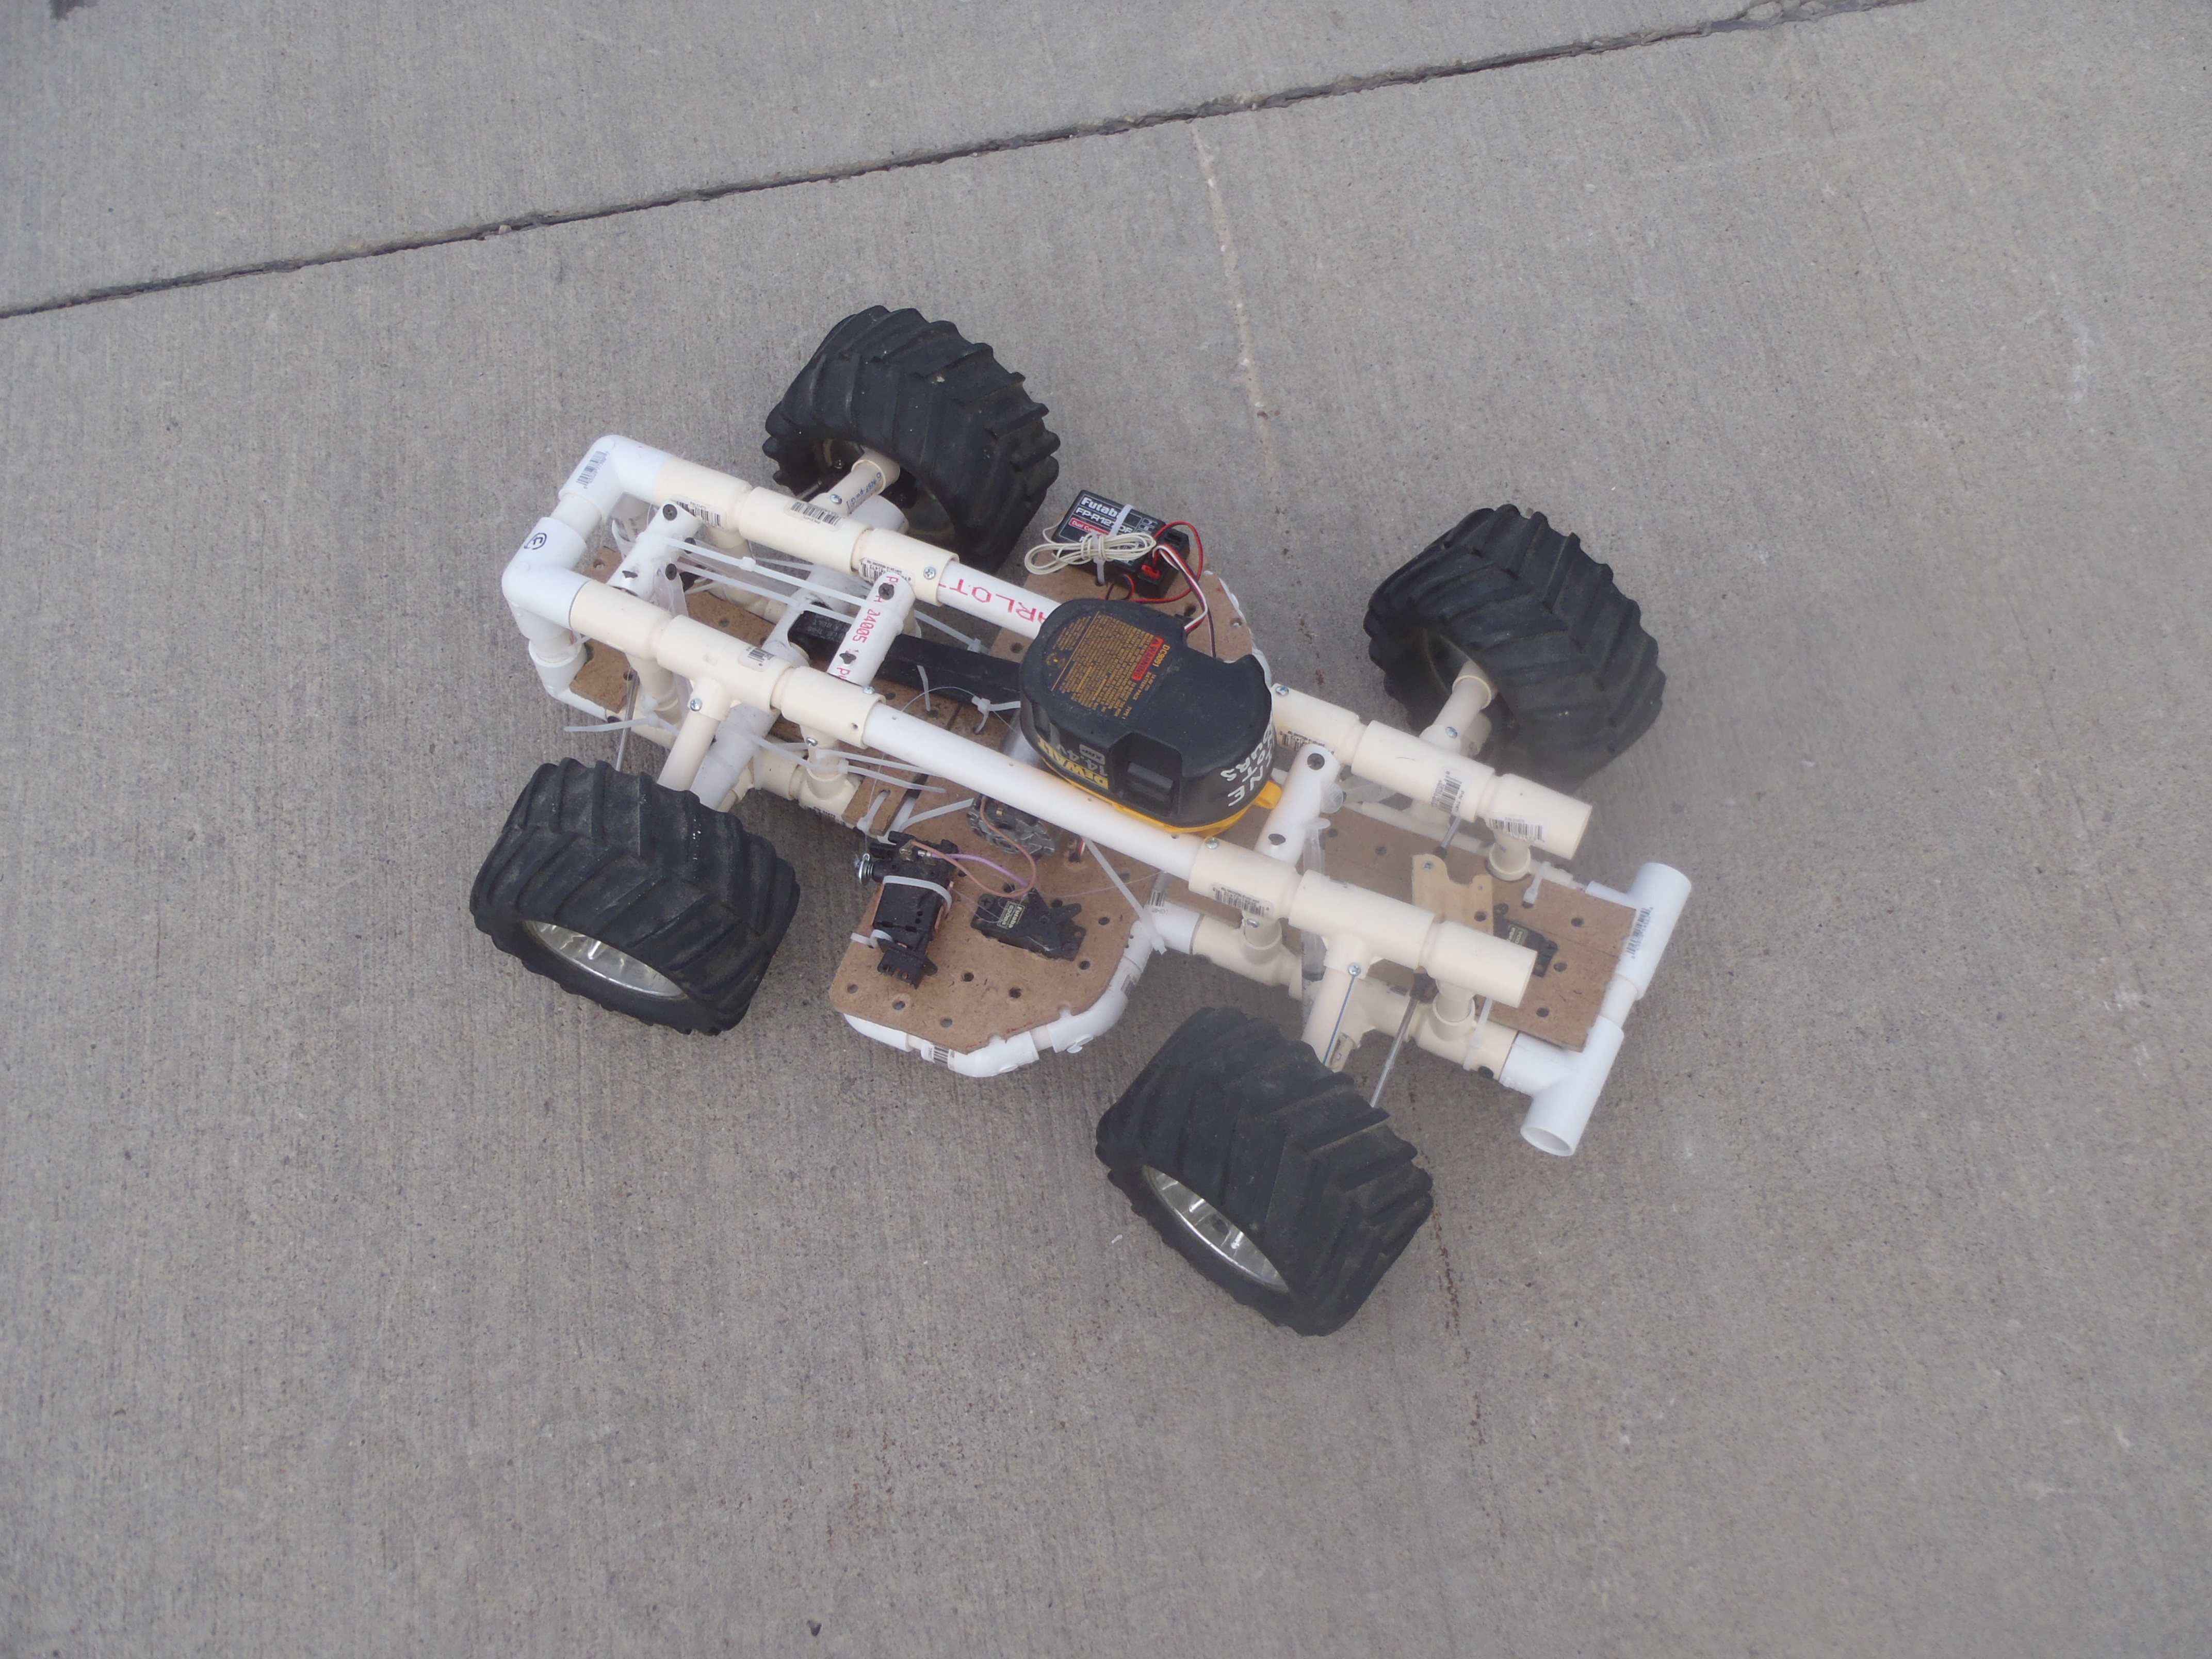 Build a RC Car from Common Materials